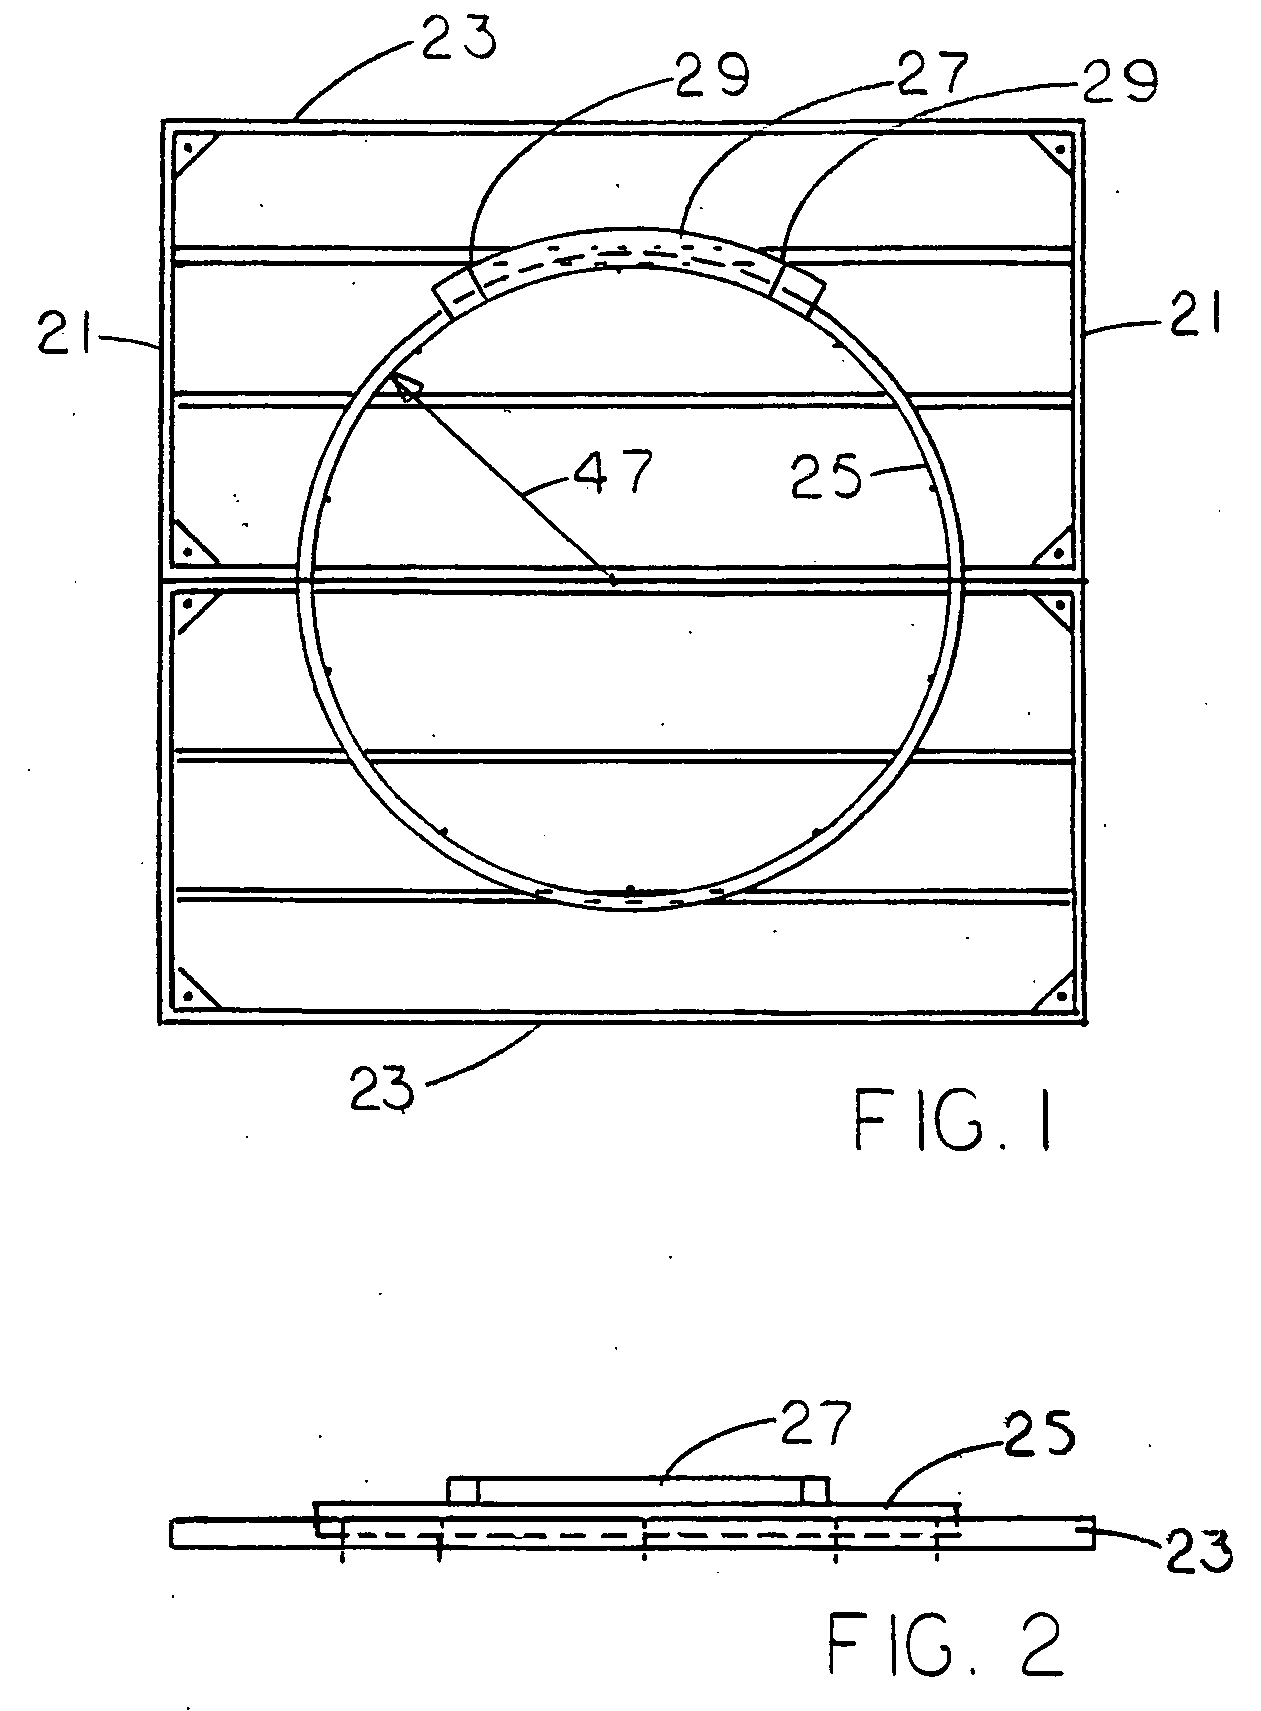 Form for constructing a thrower's circle